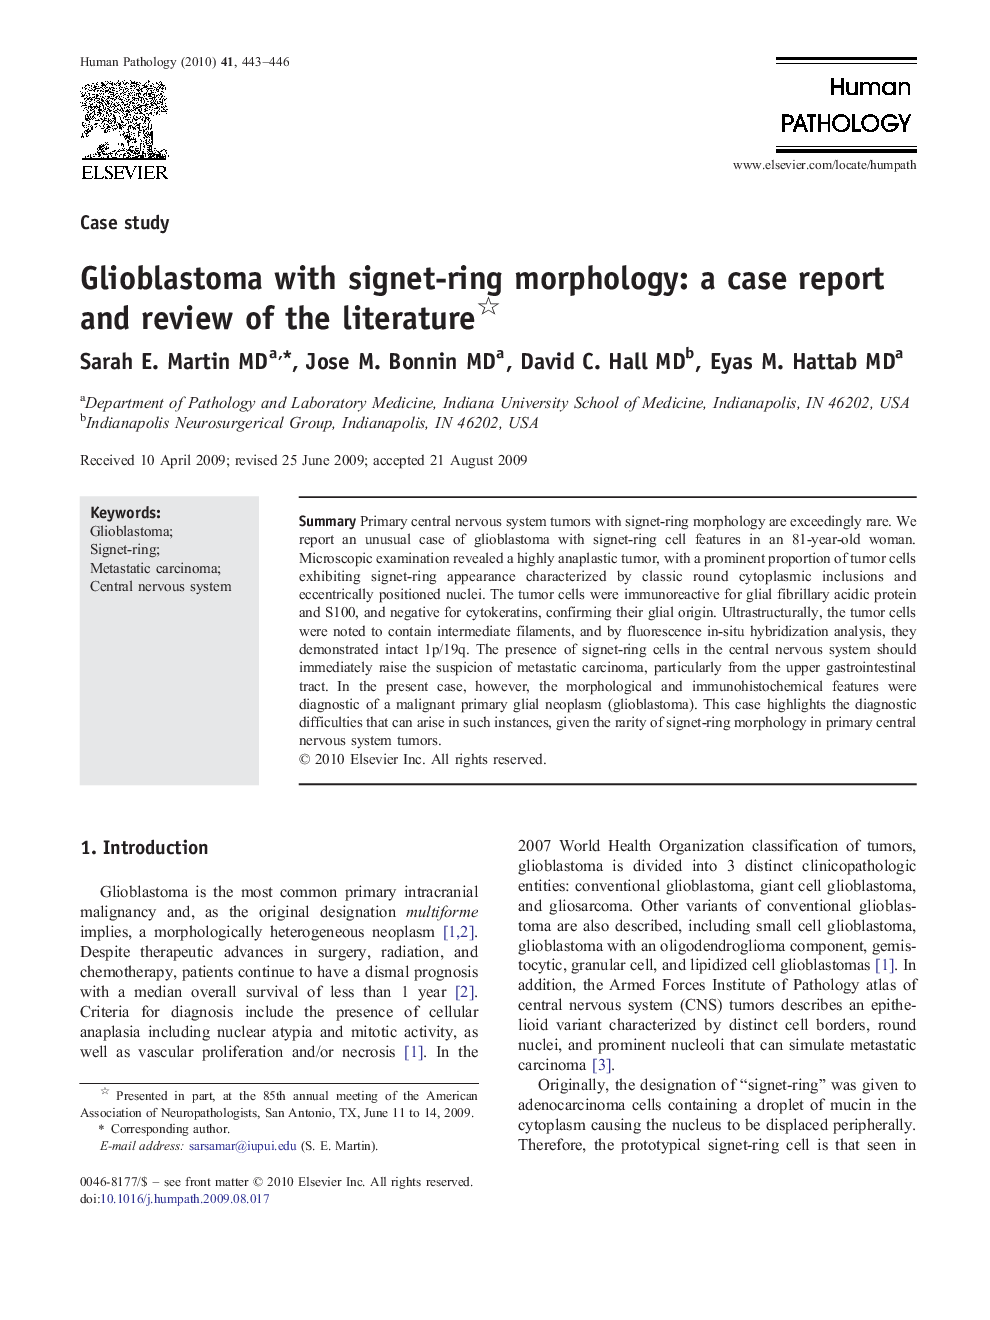 Glioblastoma with signet-ring morphology: a case report and review of the literature